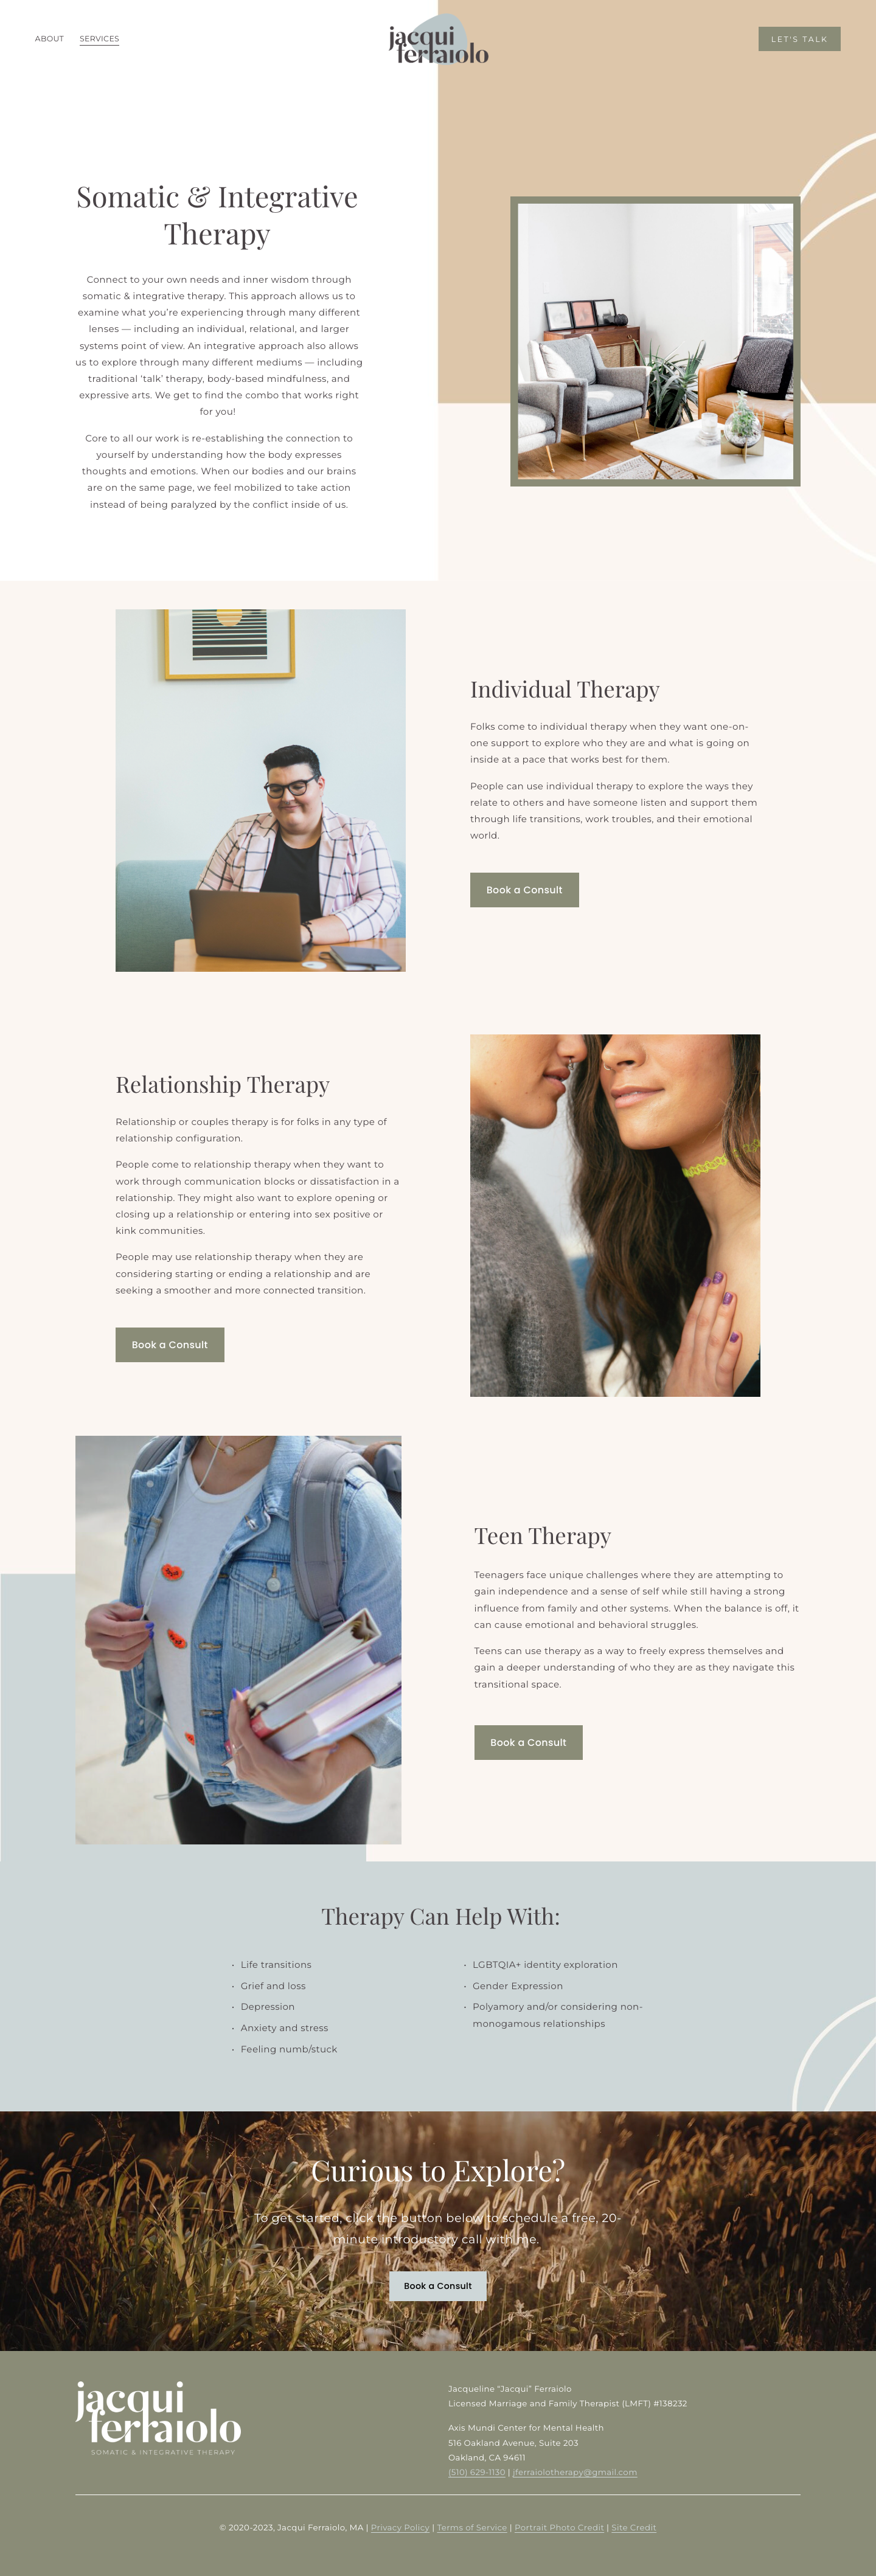 jacqui-ferraiolo-therapy-services-page.png